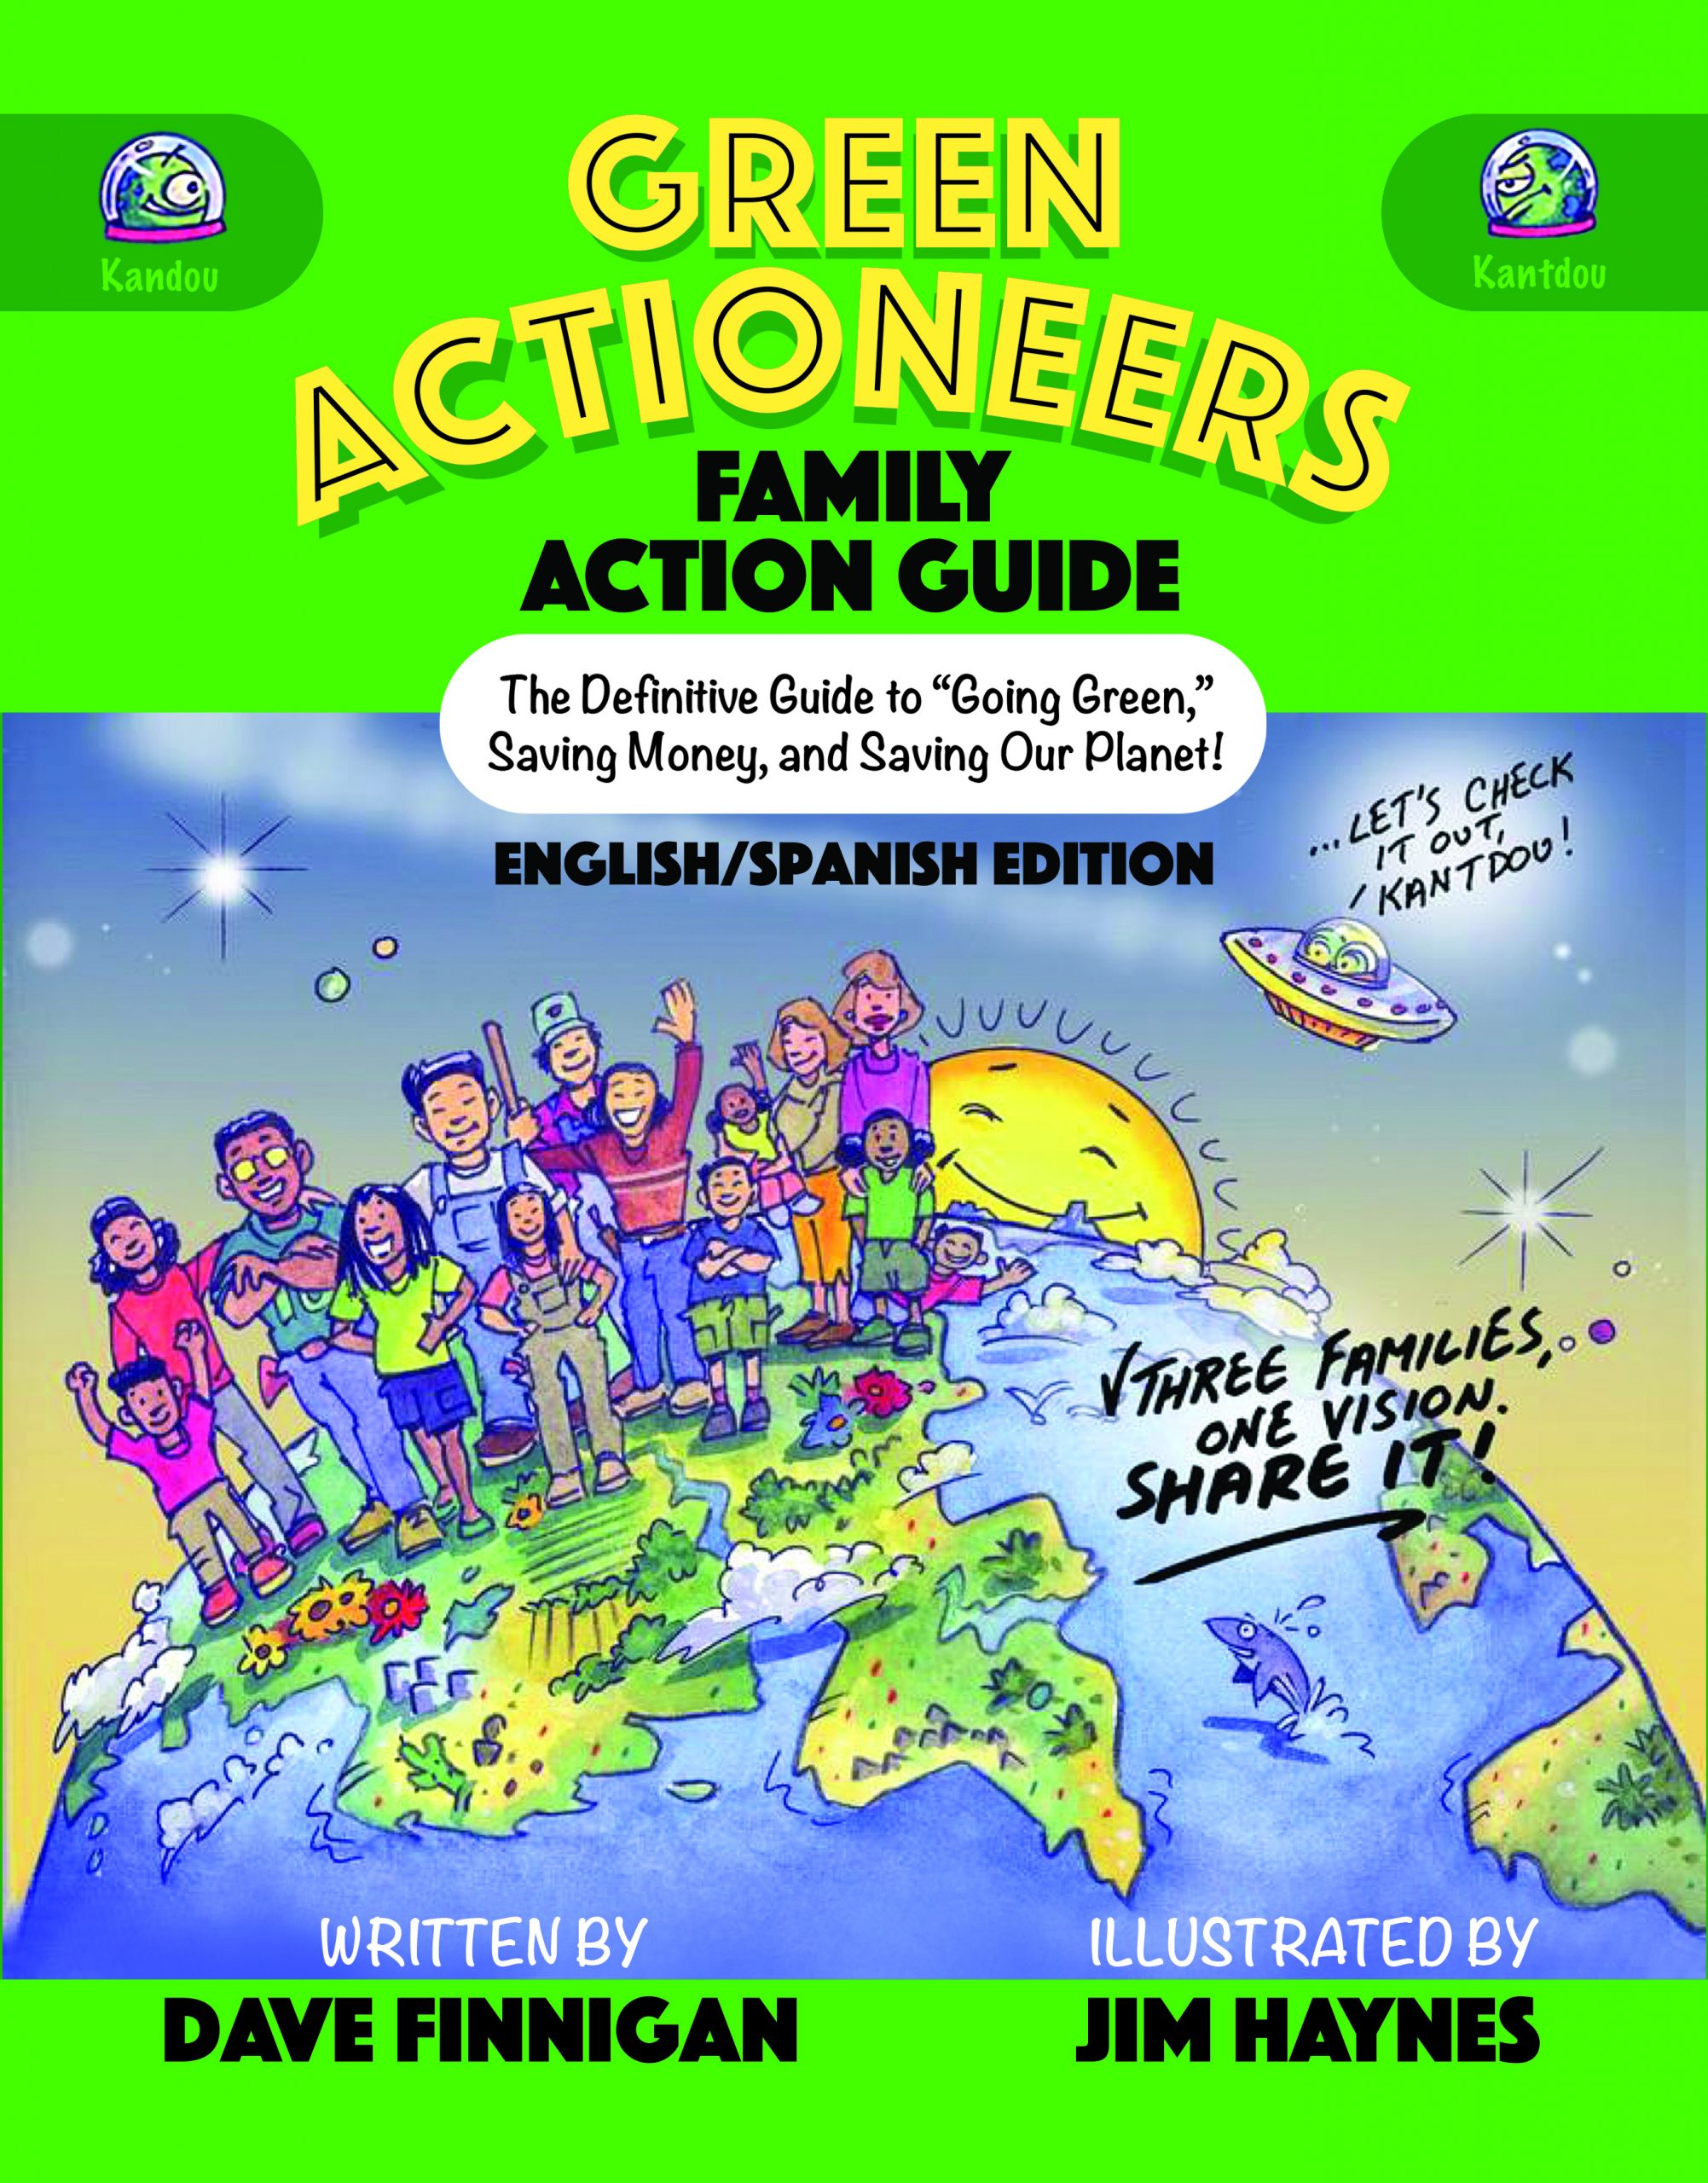 Green Actioneers Activity Guide front cover